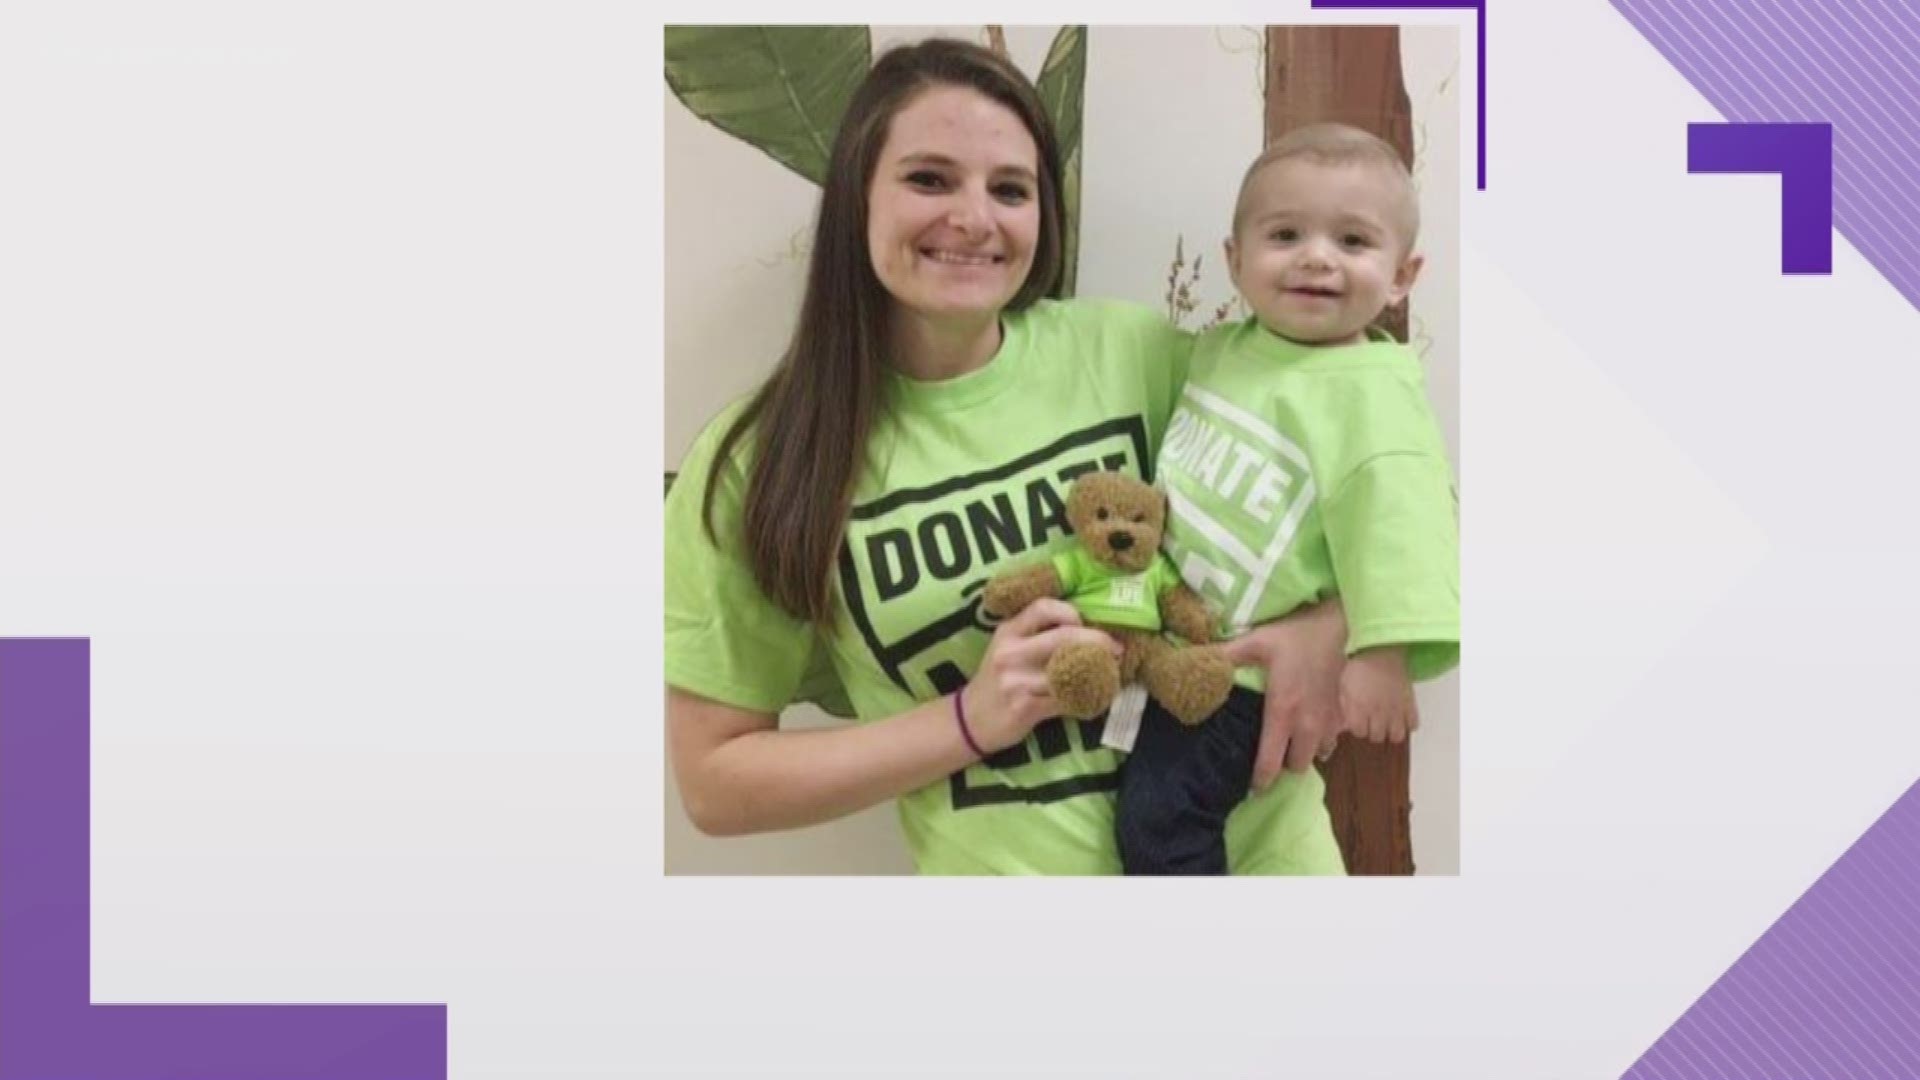 One-year-old Oakley was on dialysis for the first few months of his life before he was able to receive part of his father's kidney.